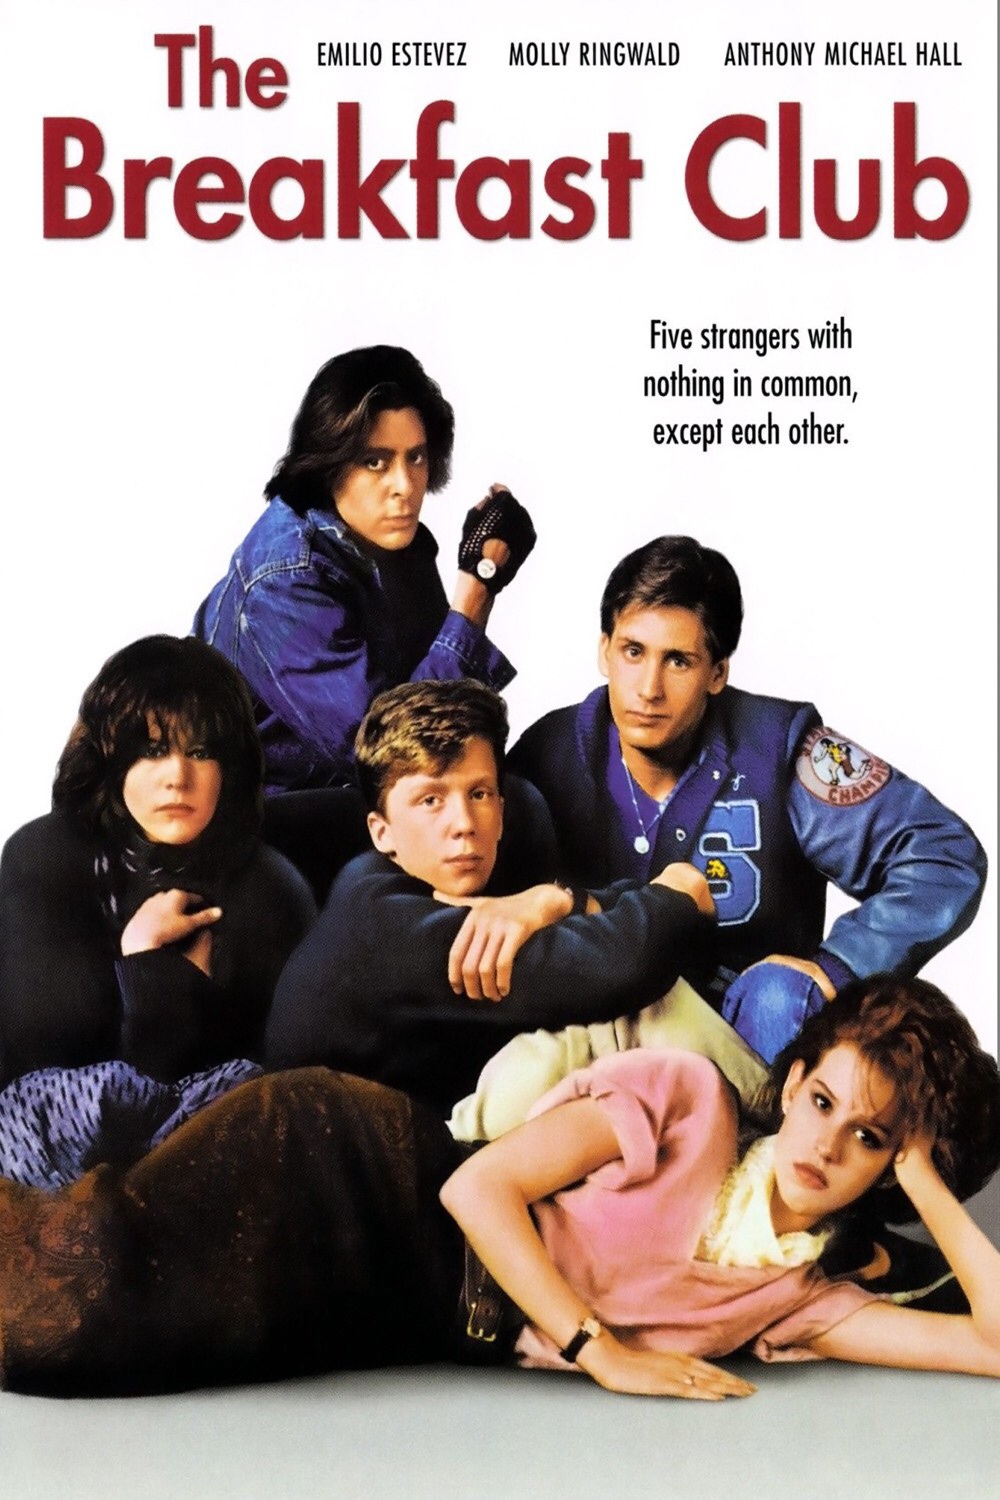 breakfast club poster - Emilio Estevez Molly Ringwald Anthony Michael Hall Breakfast Club Five strangers with nothing in common except each other.